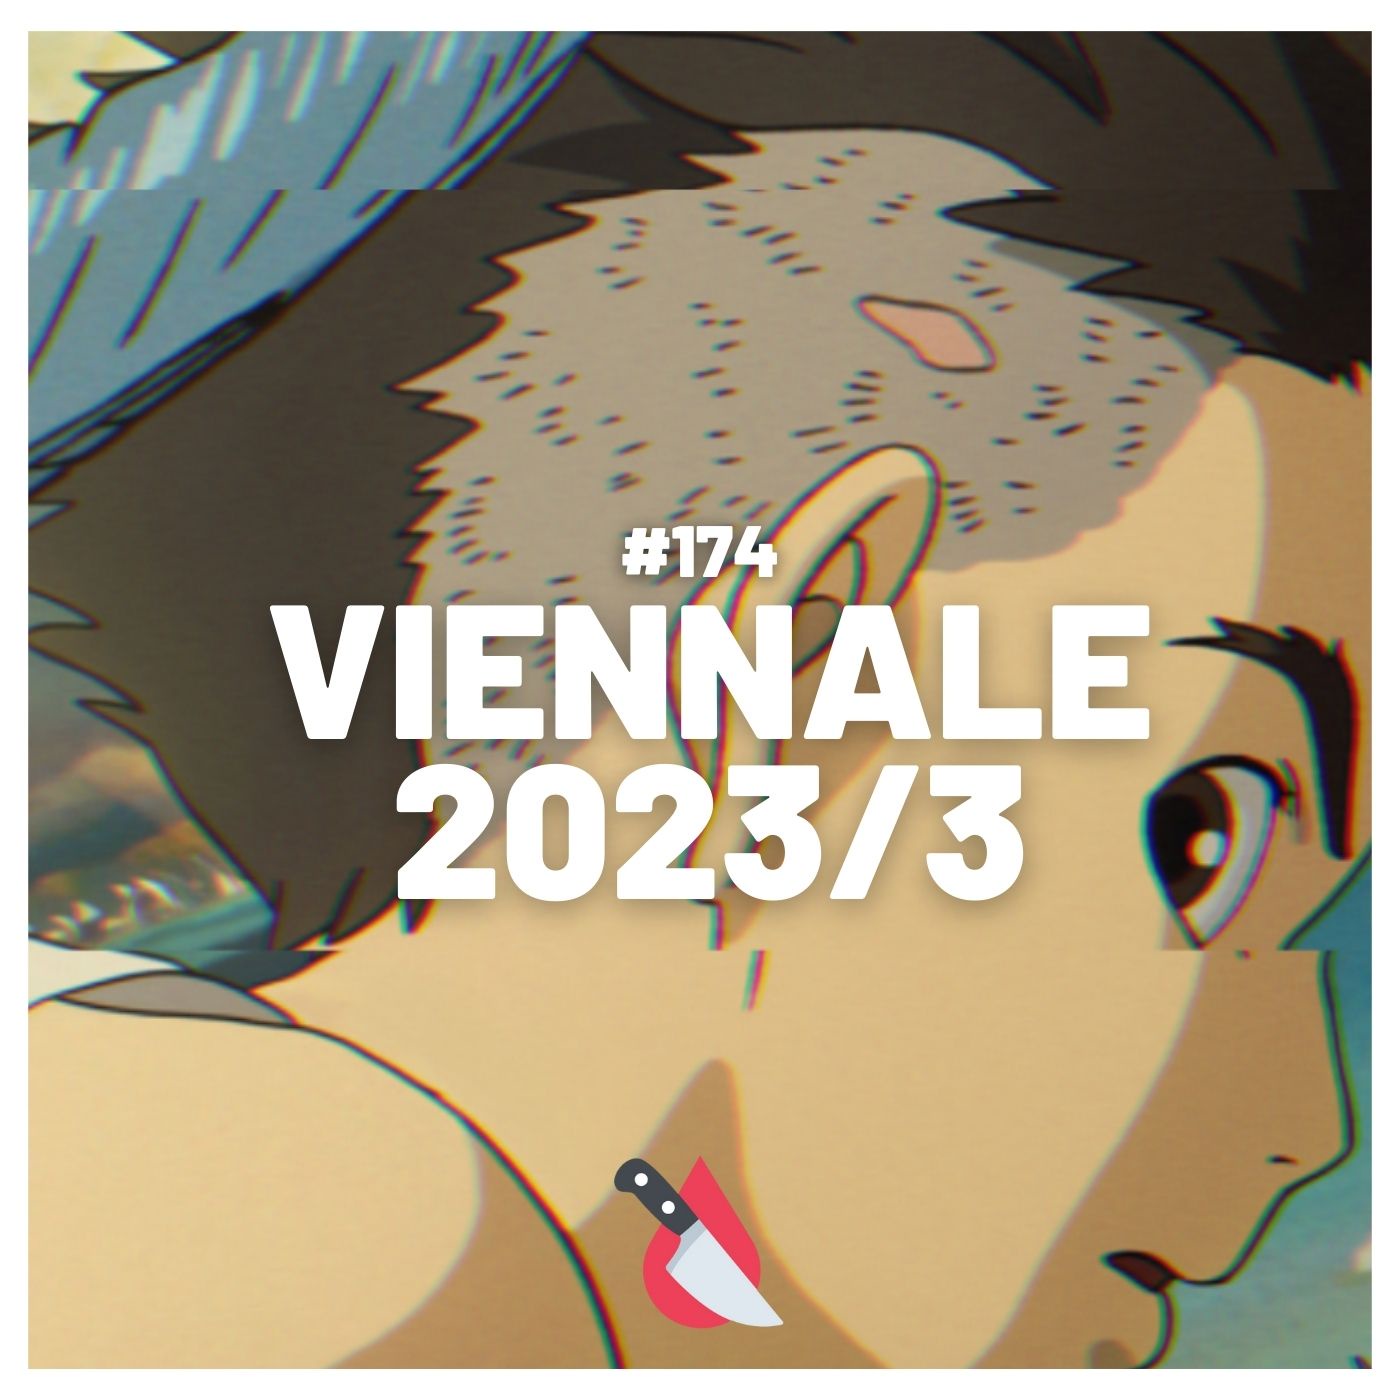 #174 - Viennale: The Boy and the Heron, Poor Things, All of Us Strangers